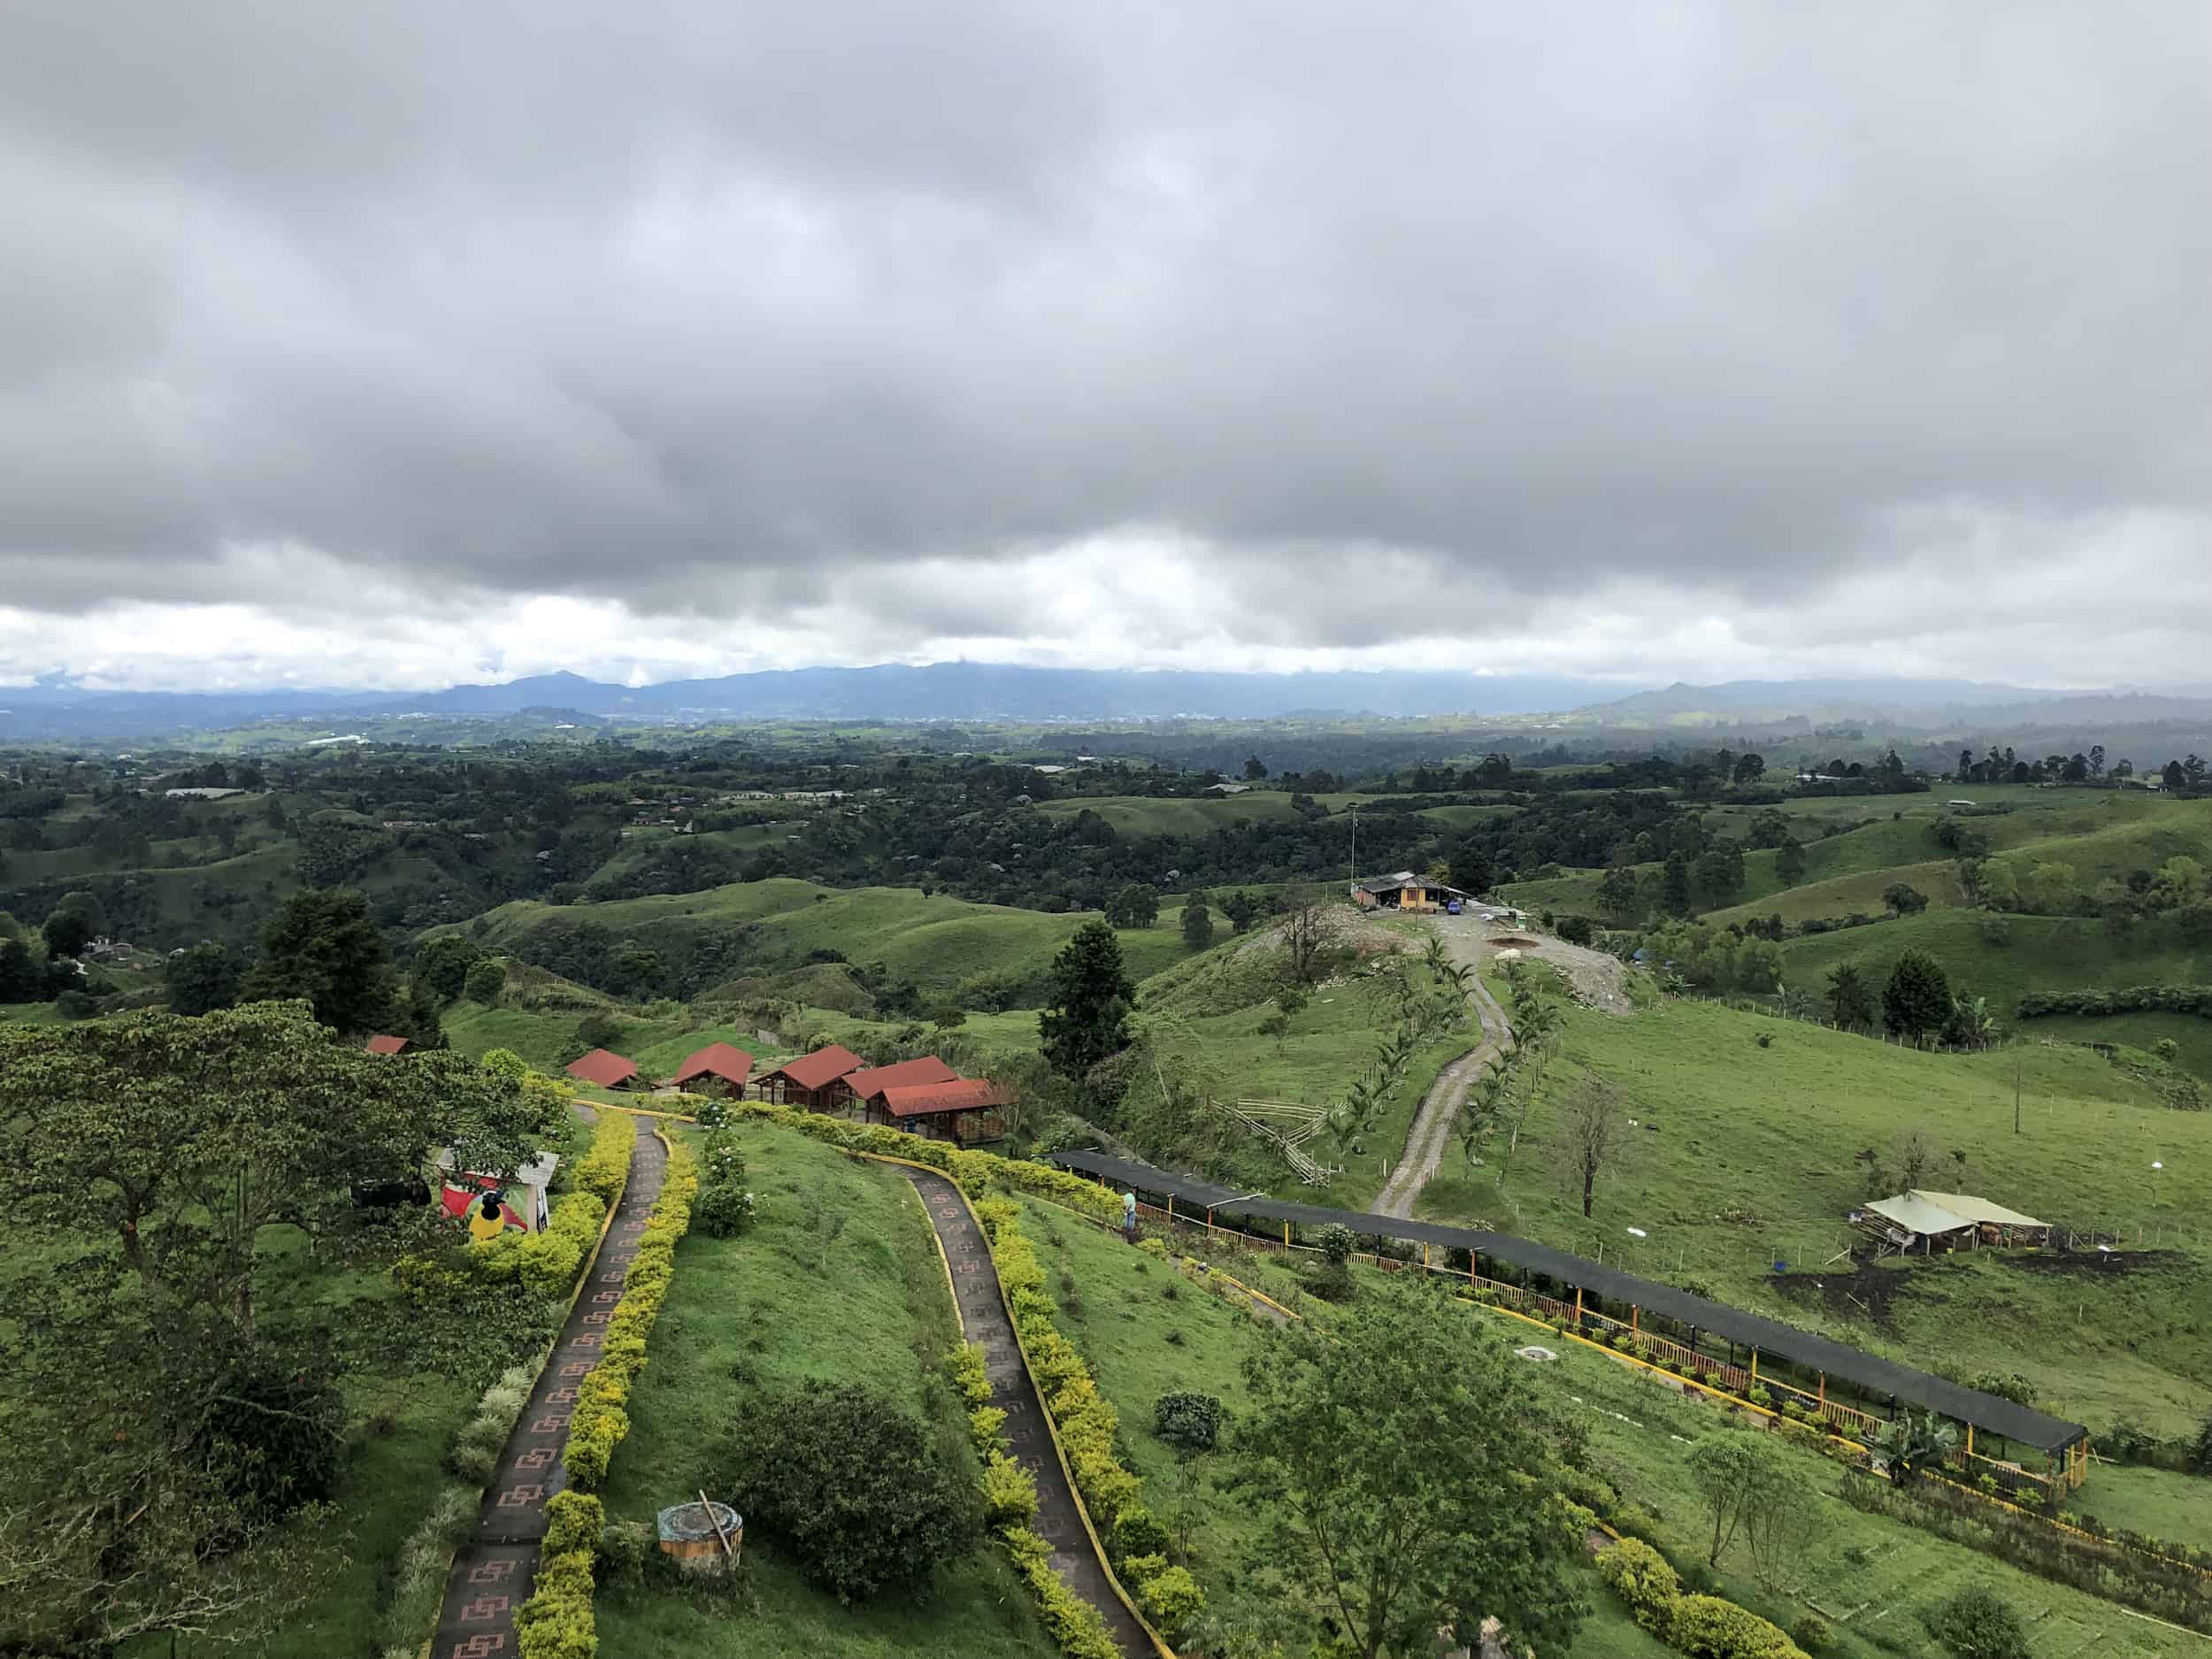 View from the top of the Mirador Colina Iluminada in Filandia, Quindío, Colombia